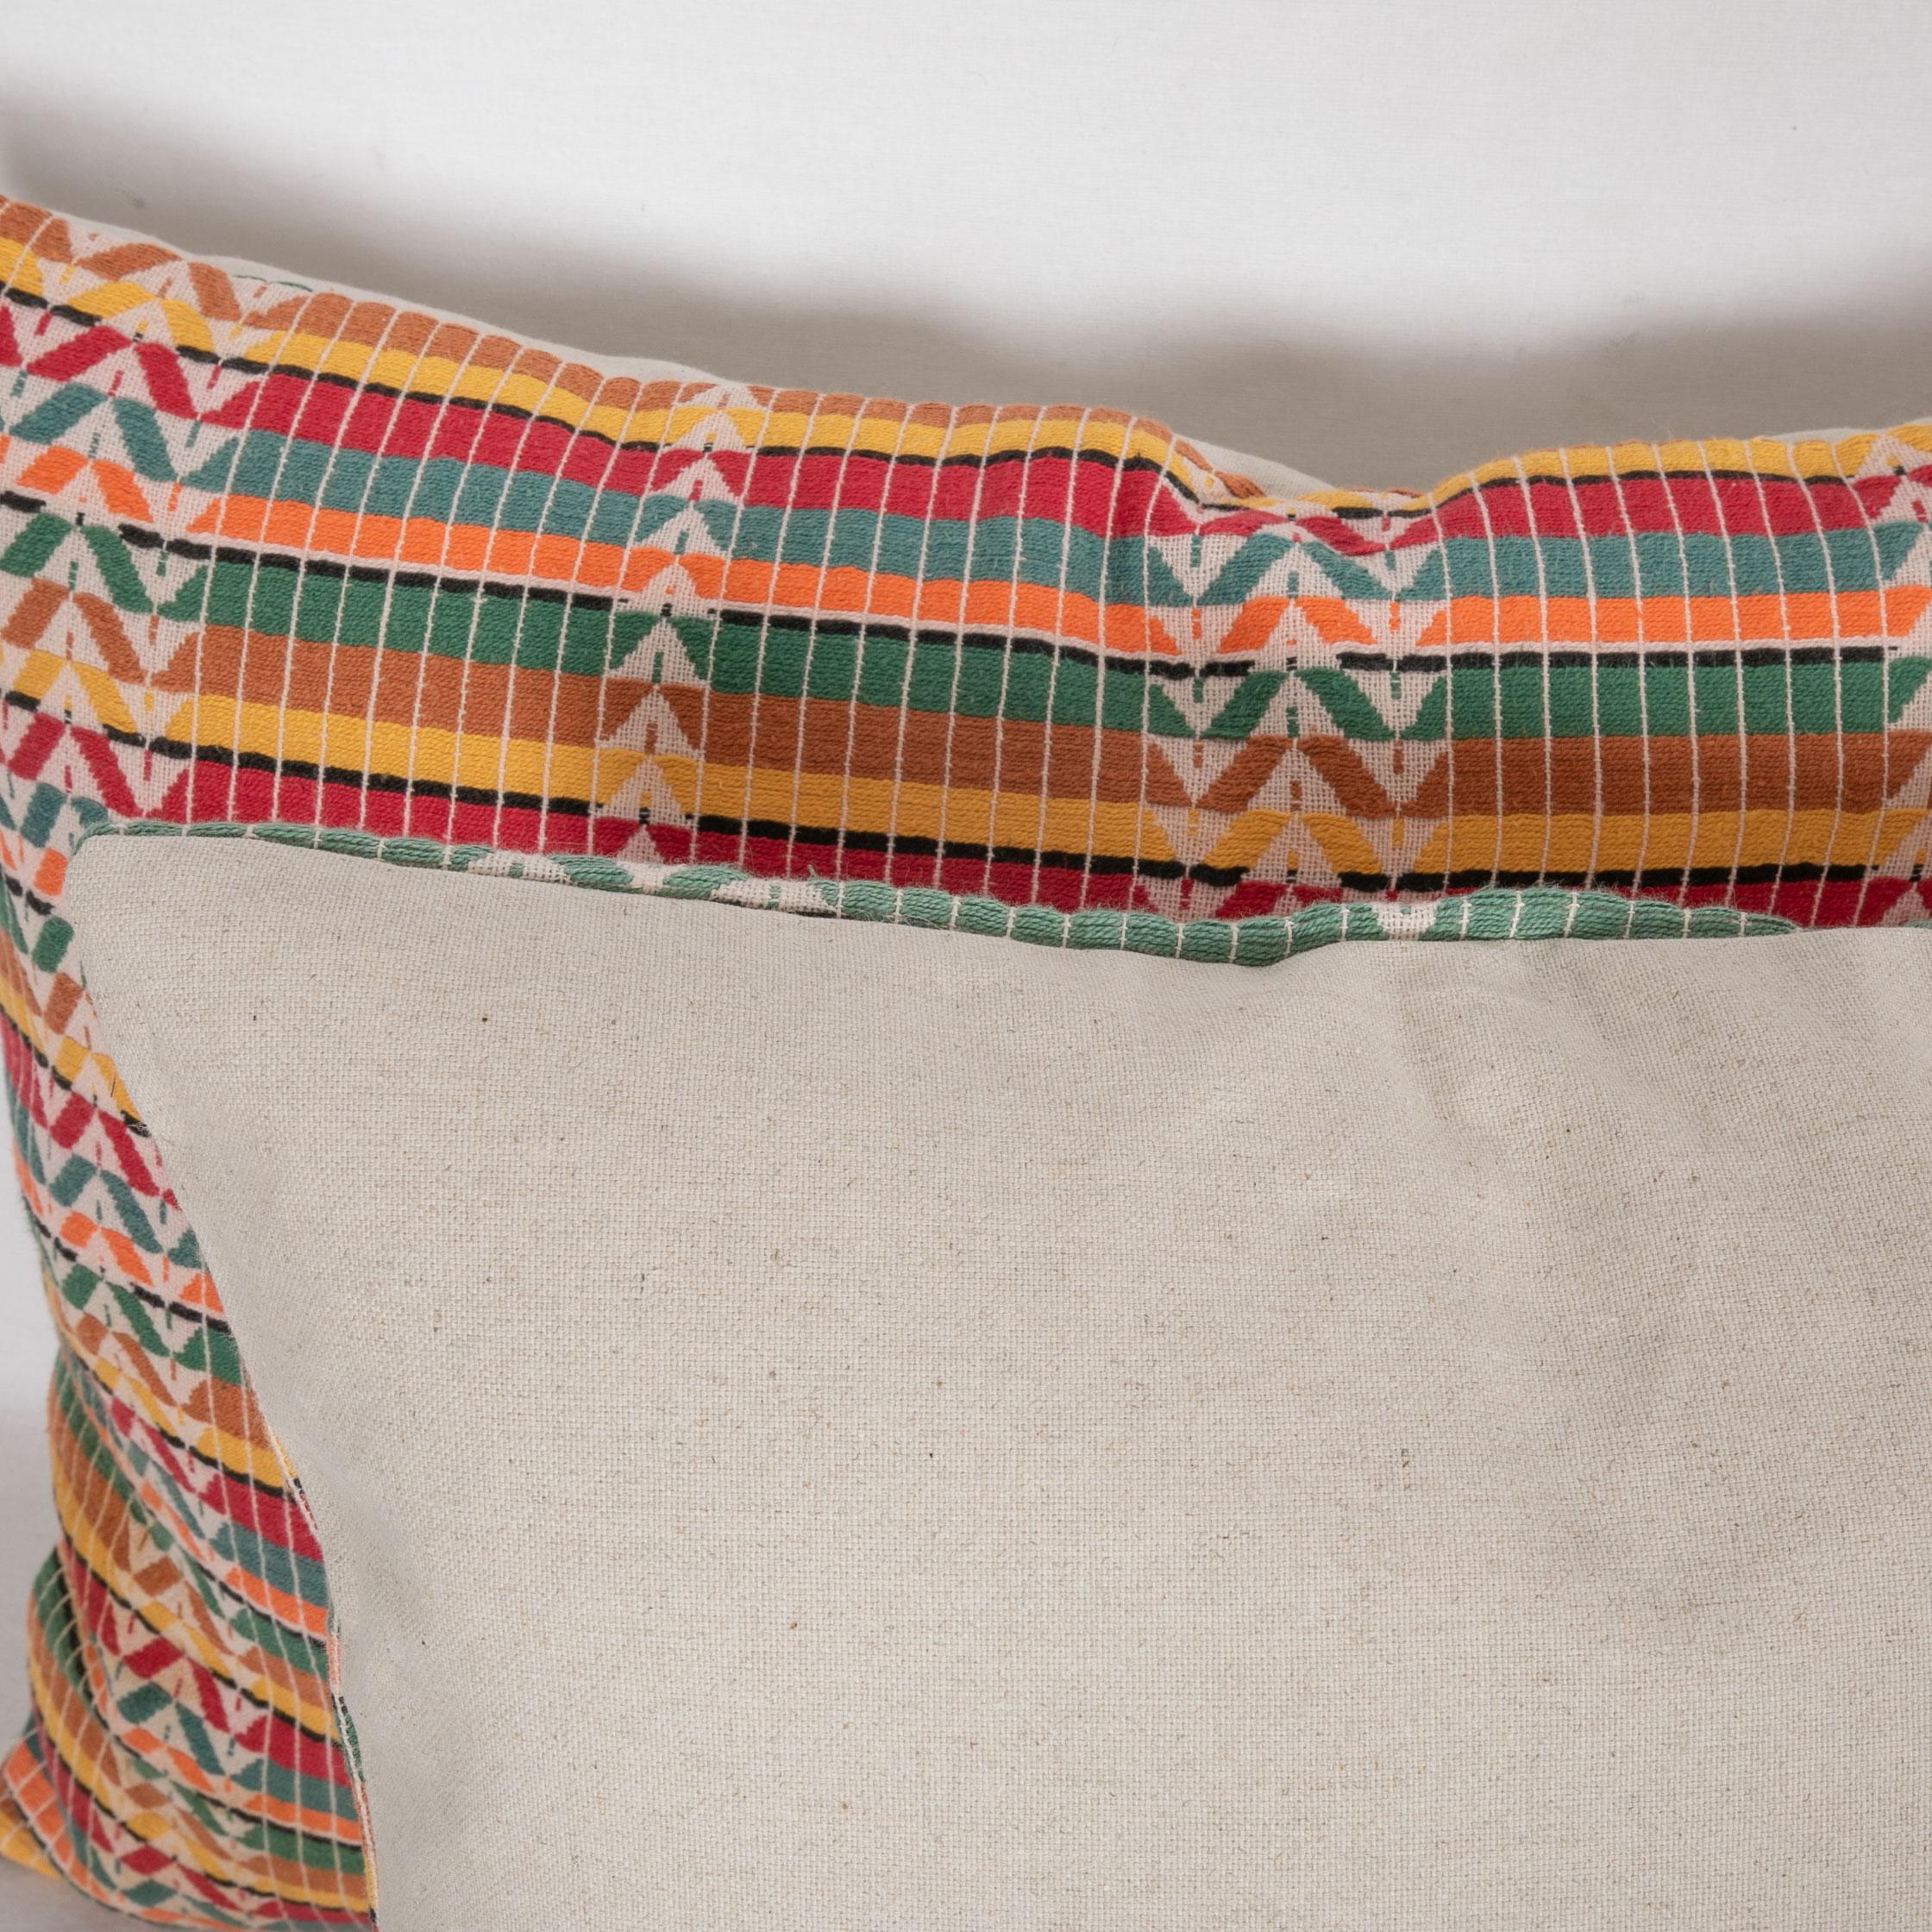 Embroidered Pillow Cases Fashioned from a Mid-20th Century Afghan Hazara Embroidery For Sale